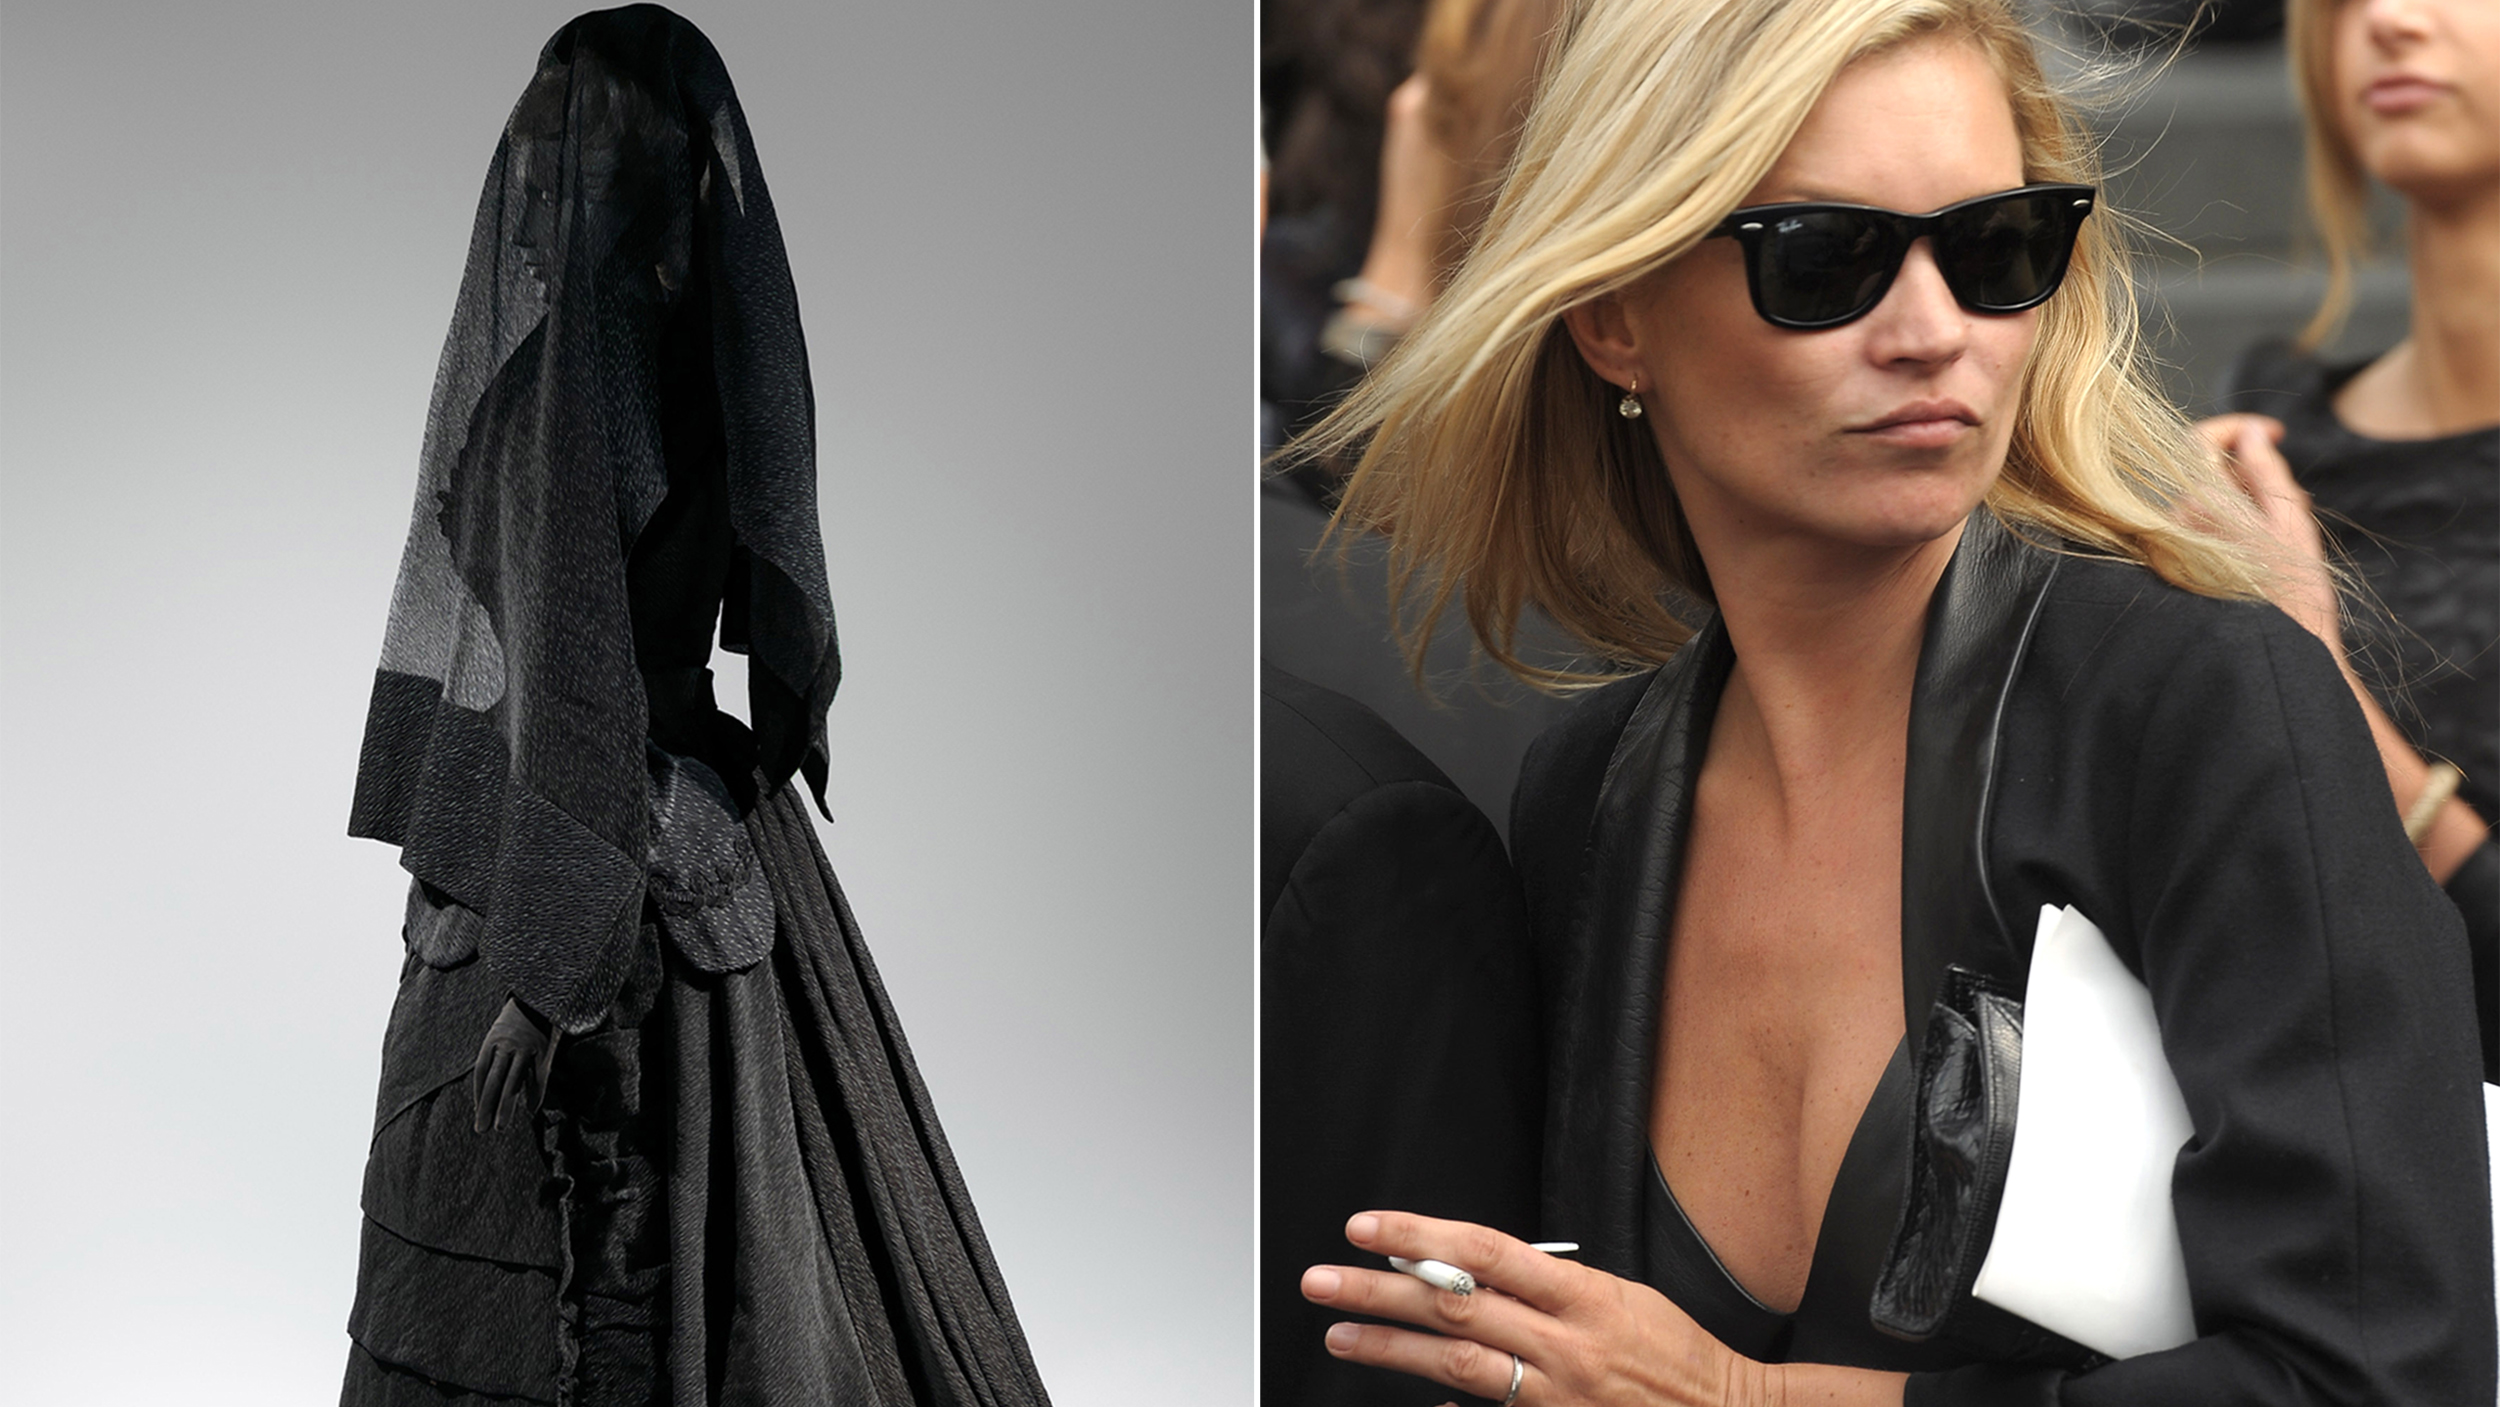 Funeral fashion? The evolution of mourning attire